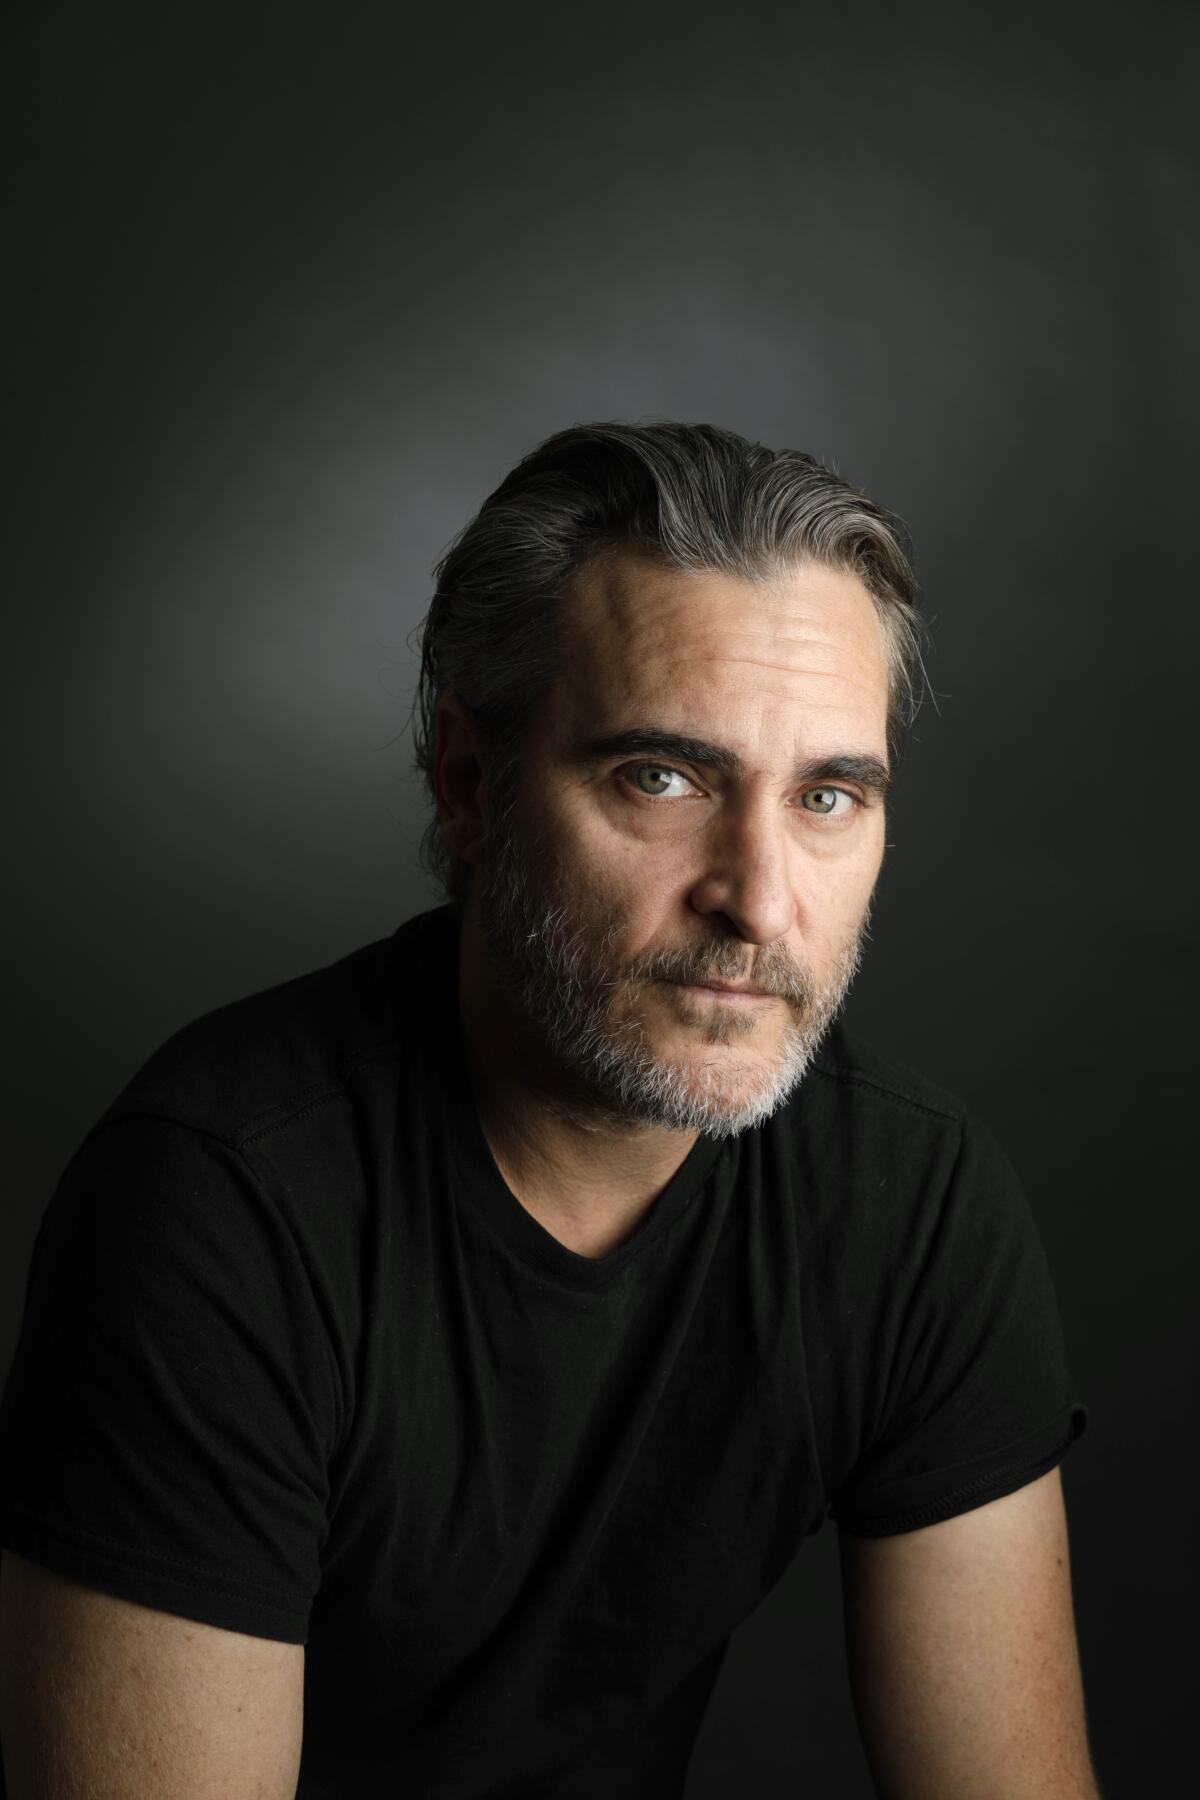 Joaquin Phoenix is nominated in the lead actor category for his role in "Joker."